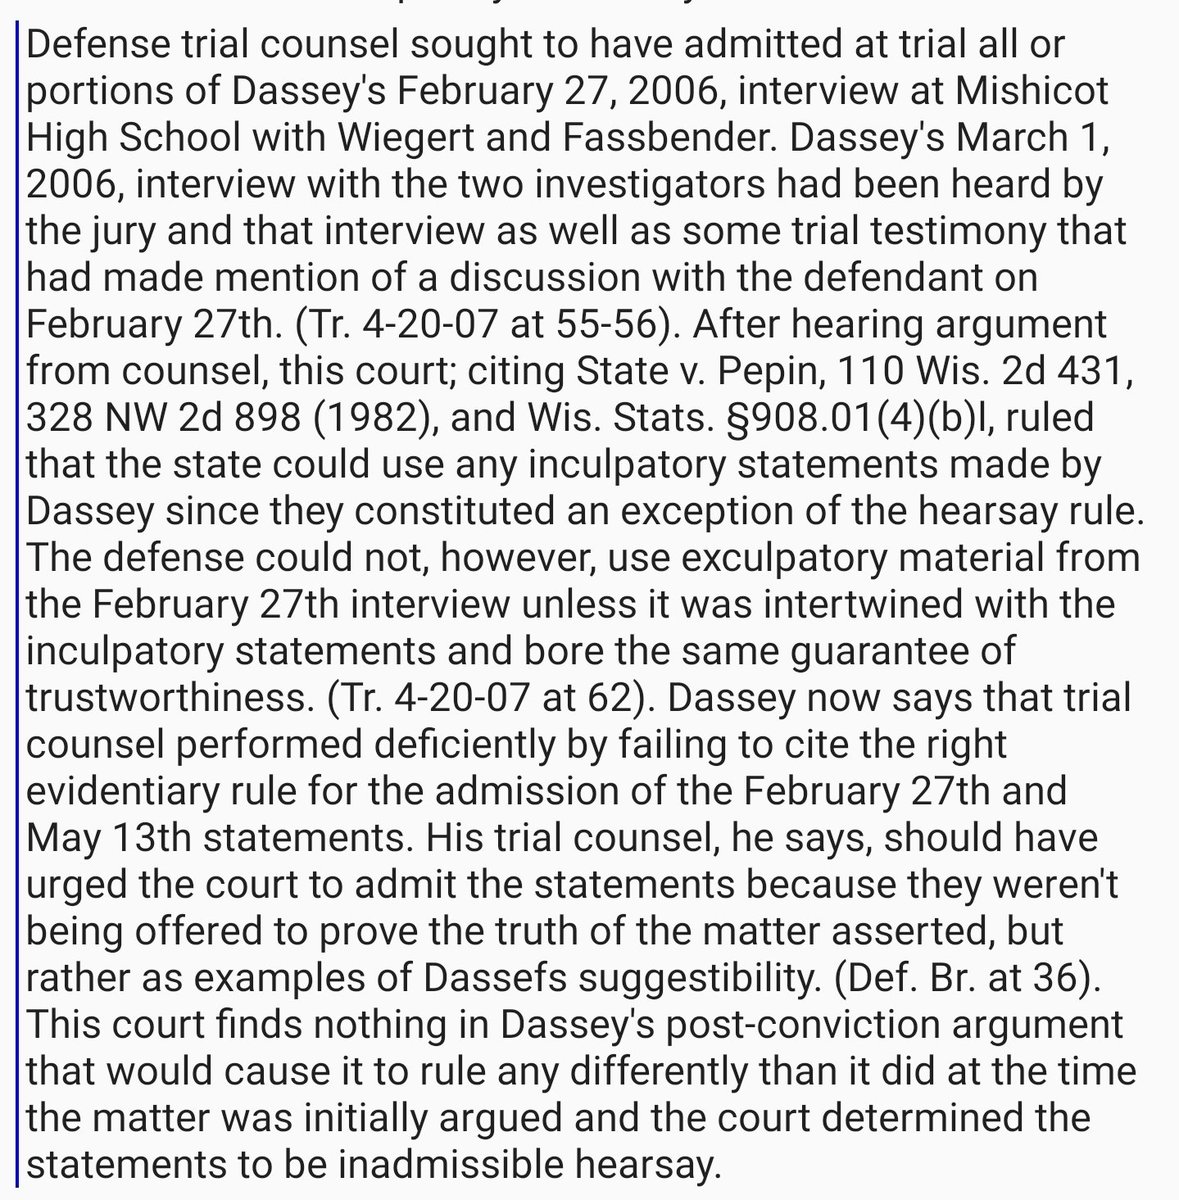 Judge Fox refusal to allow the defence to present exculpatory material from the Feb 27 and May 13 statements left Brendan with no way to defend himself. 

#freebrendandassey
#brendandassey
#MakingaMurderer
#BringBrendanHome